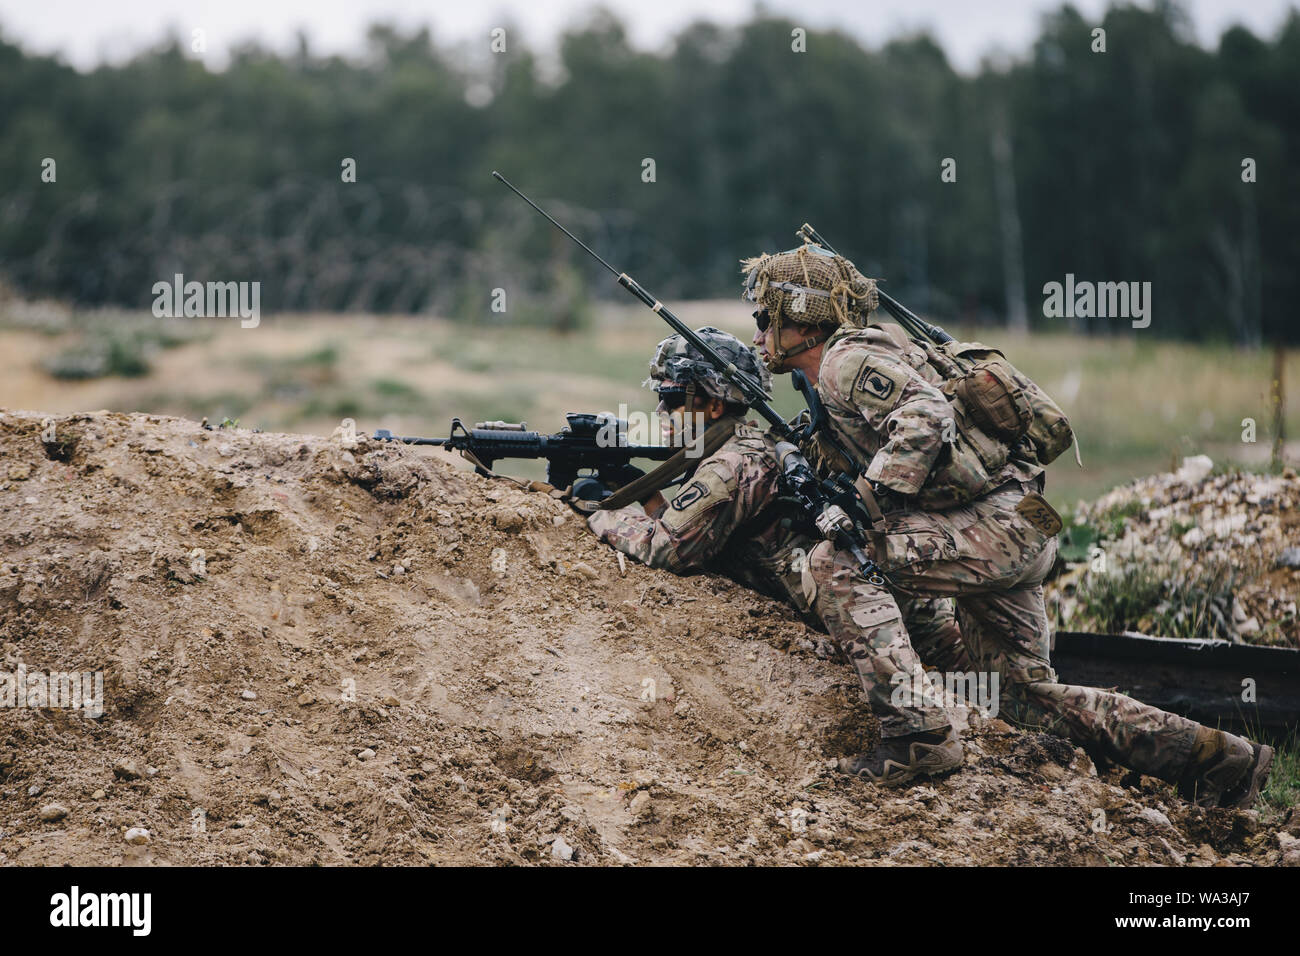 U.S. Army paratroopers assigned to 2nd Battalion, 503rd Infantry Regiment, 173rd Airborne Brigade fire weapon during Exercise Rock Shock 2 in Grafenwoehr Training Area, August 12-13, 2019.    The 173rd Airborne Brigade is the U.S. Army’s Contingency Response Force in Europe, providing rapidly deployable forces to Europe, Africa and Central Commands areas of responsibilities. Forward deployed across Italy and Germany, the brigade routinely trains alongside NATO allies and partners to build partnerships and strengthen the alliance. Stock Photo